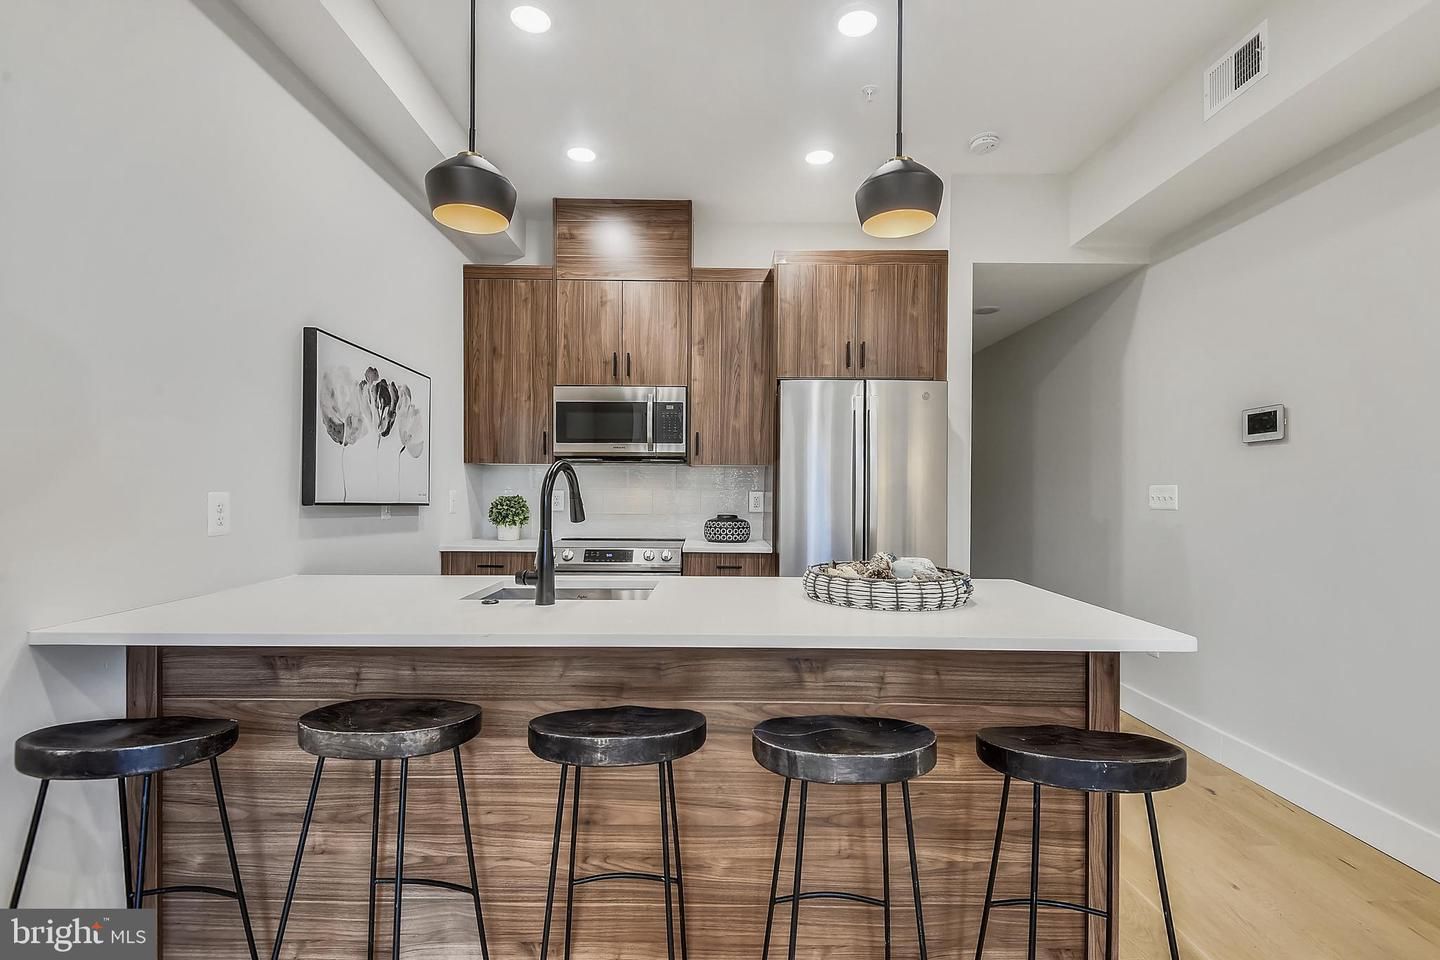 A kitchen with bar stools, white countertops, and dark wood cabinets.